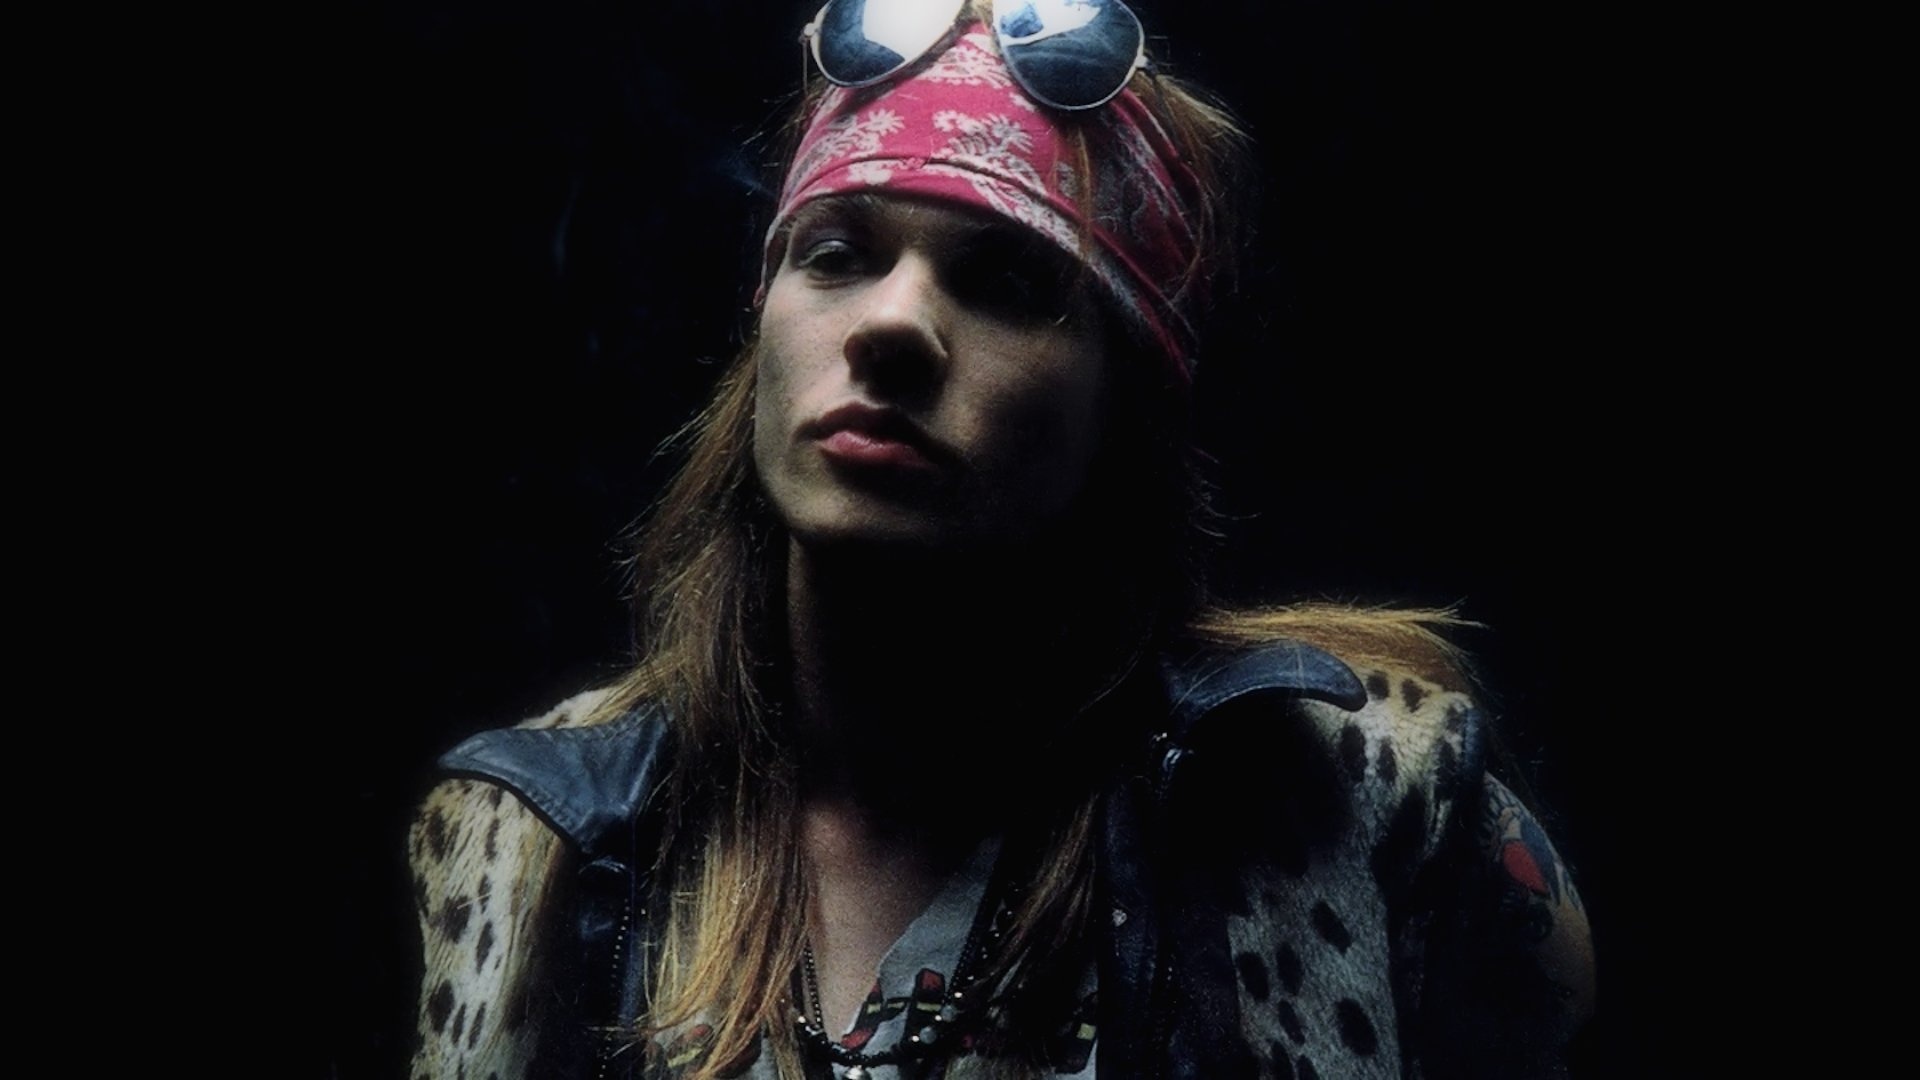 Axl Rose Wallpaper posted by Christopher Anderson 1920x1080